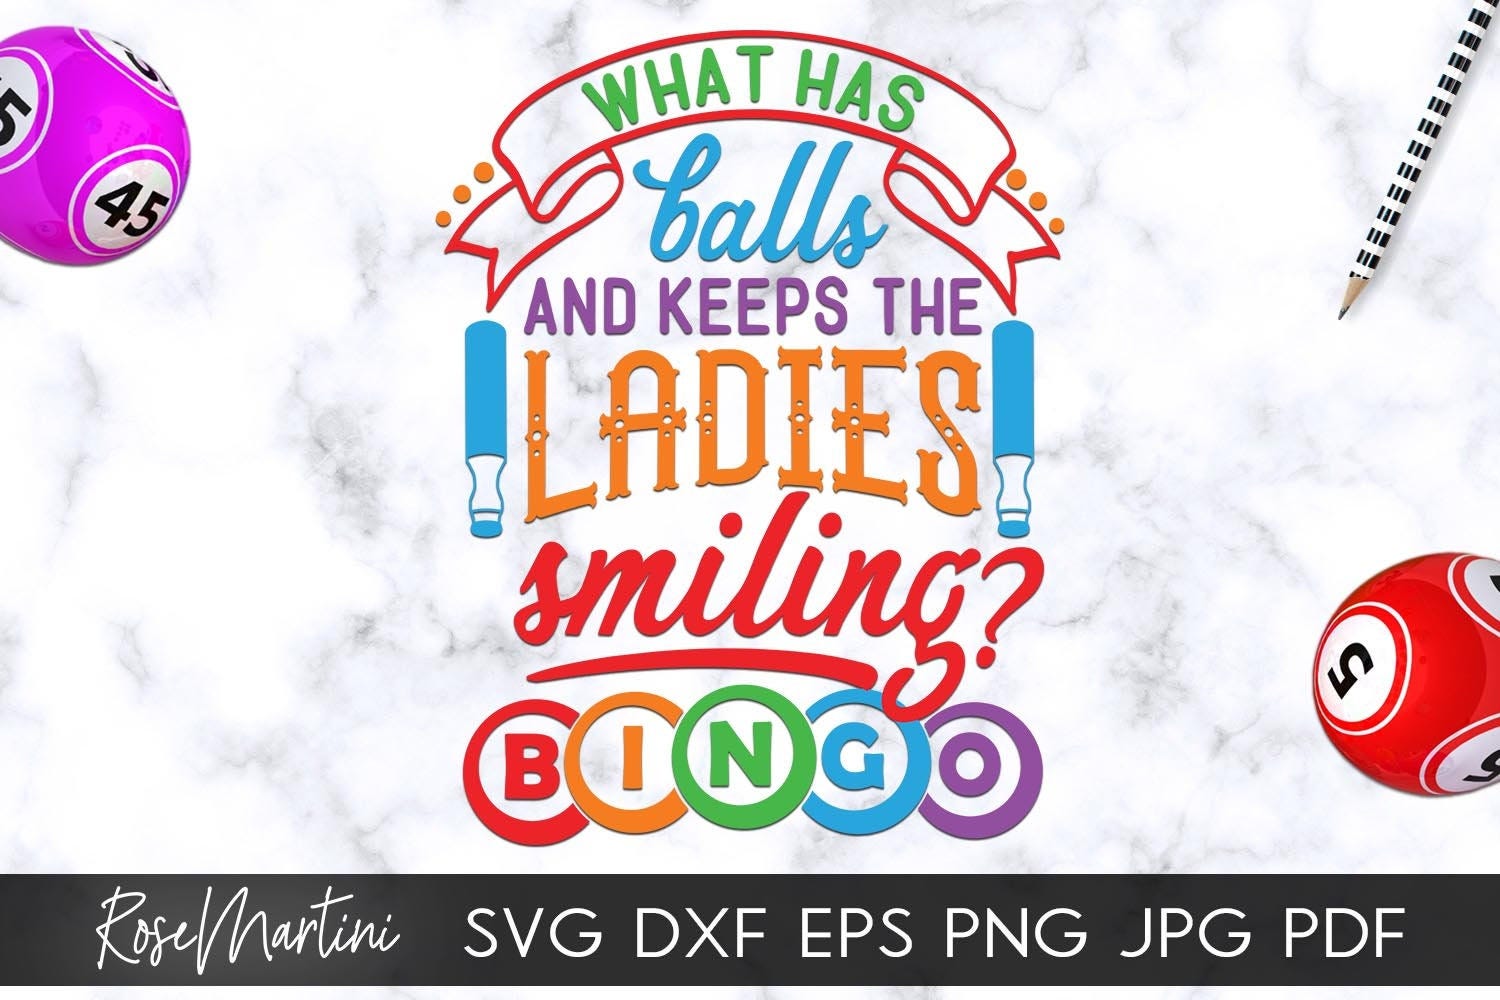 What Has Balls And Keeps The Ladies Smiling? Bingo SVG file for cutting machines - Cricut Silhouette Funny Bingo SVG Bingo lover svg